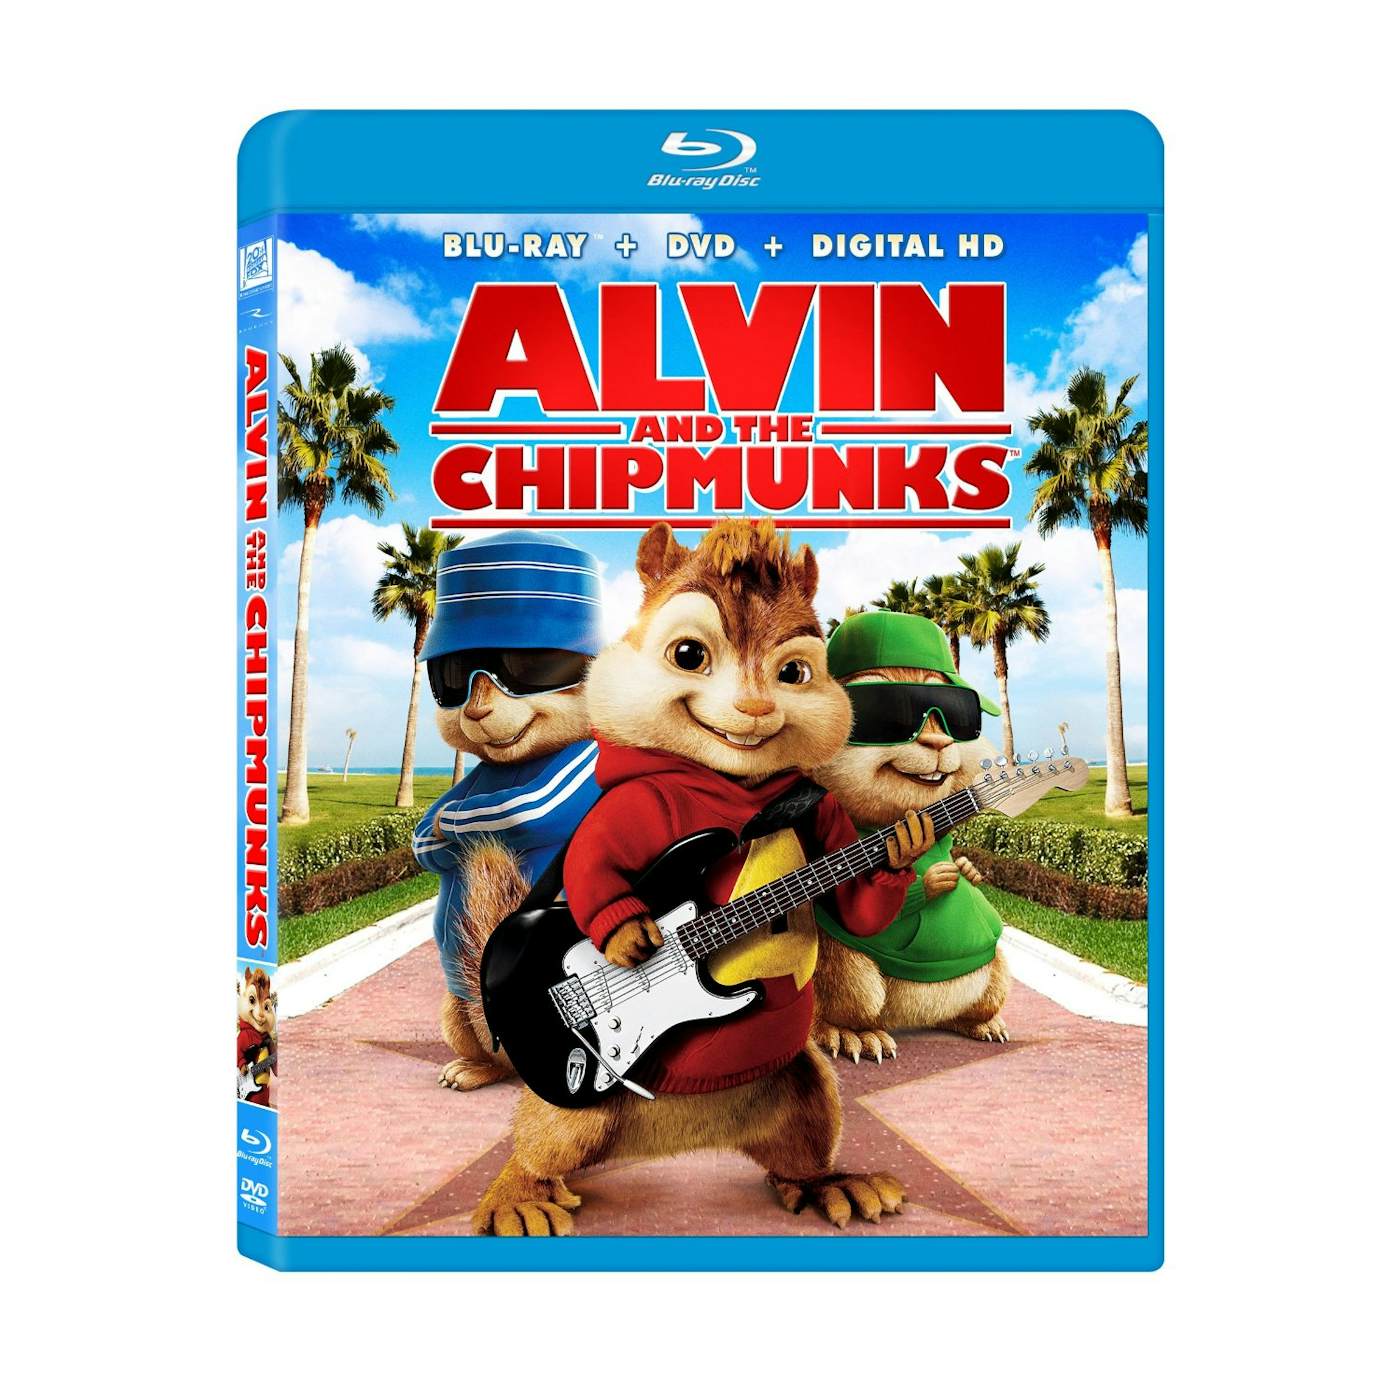 Alvin and the Chipmunks Blu-ray